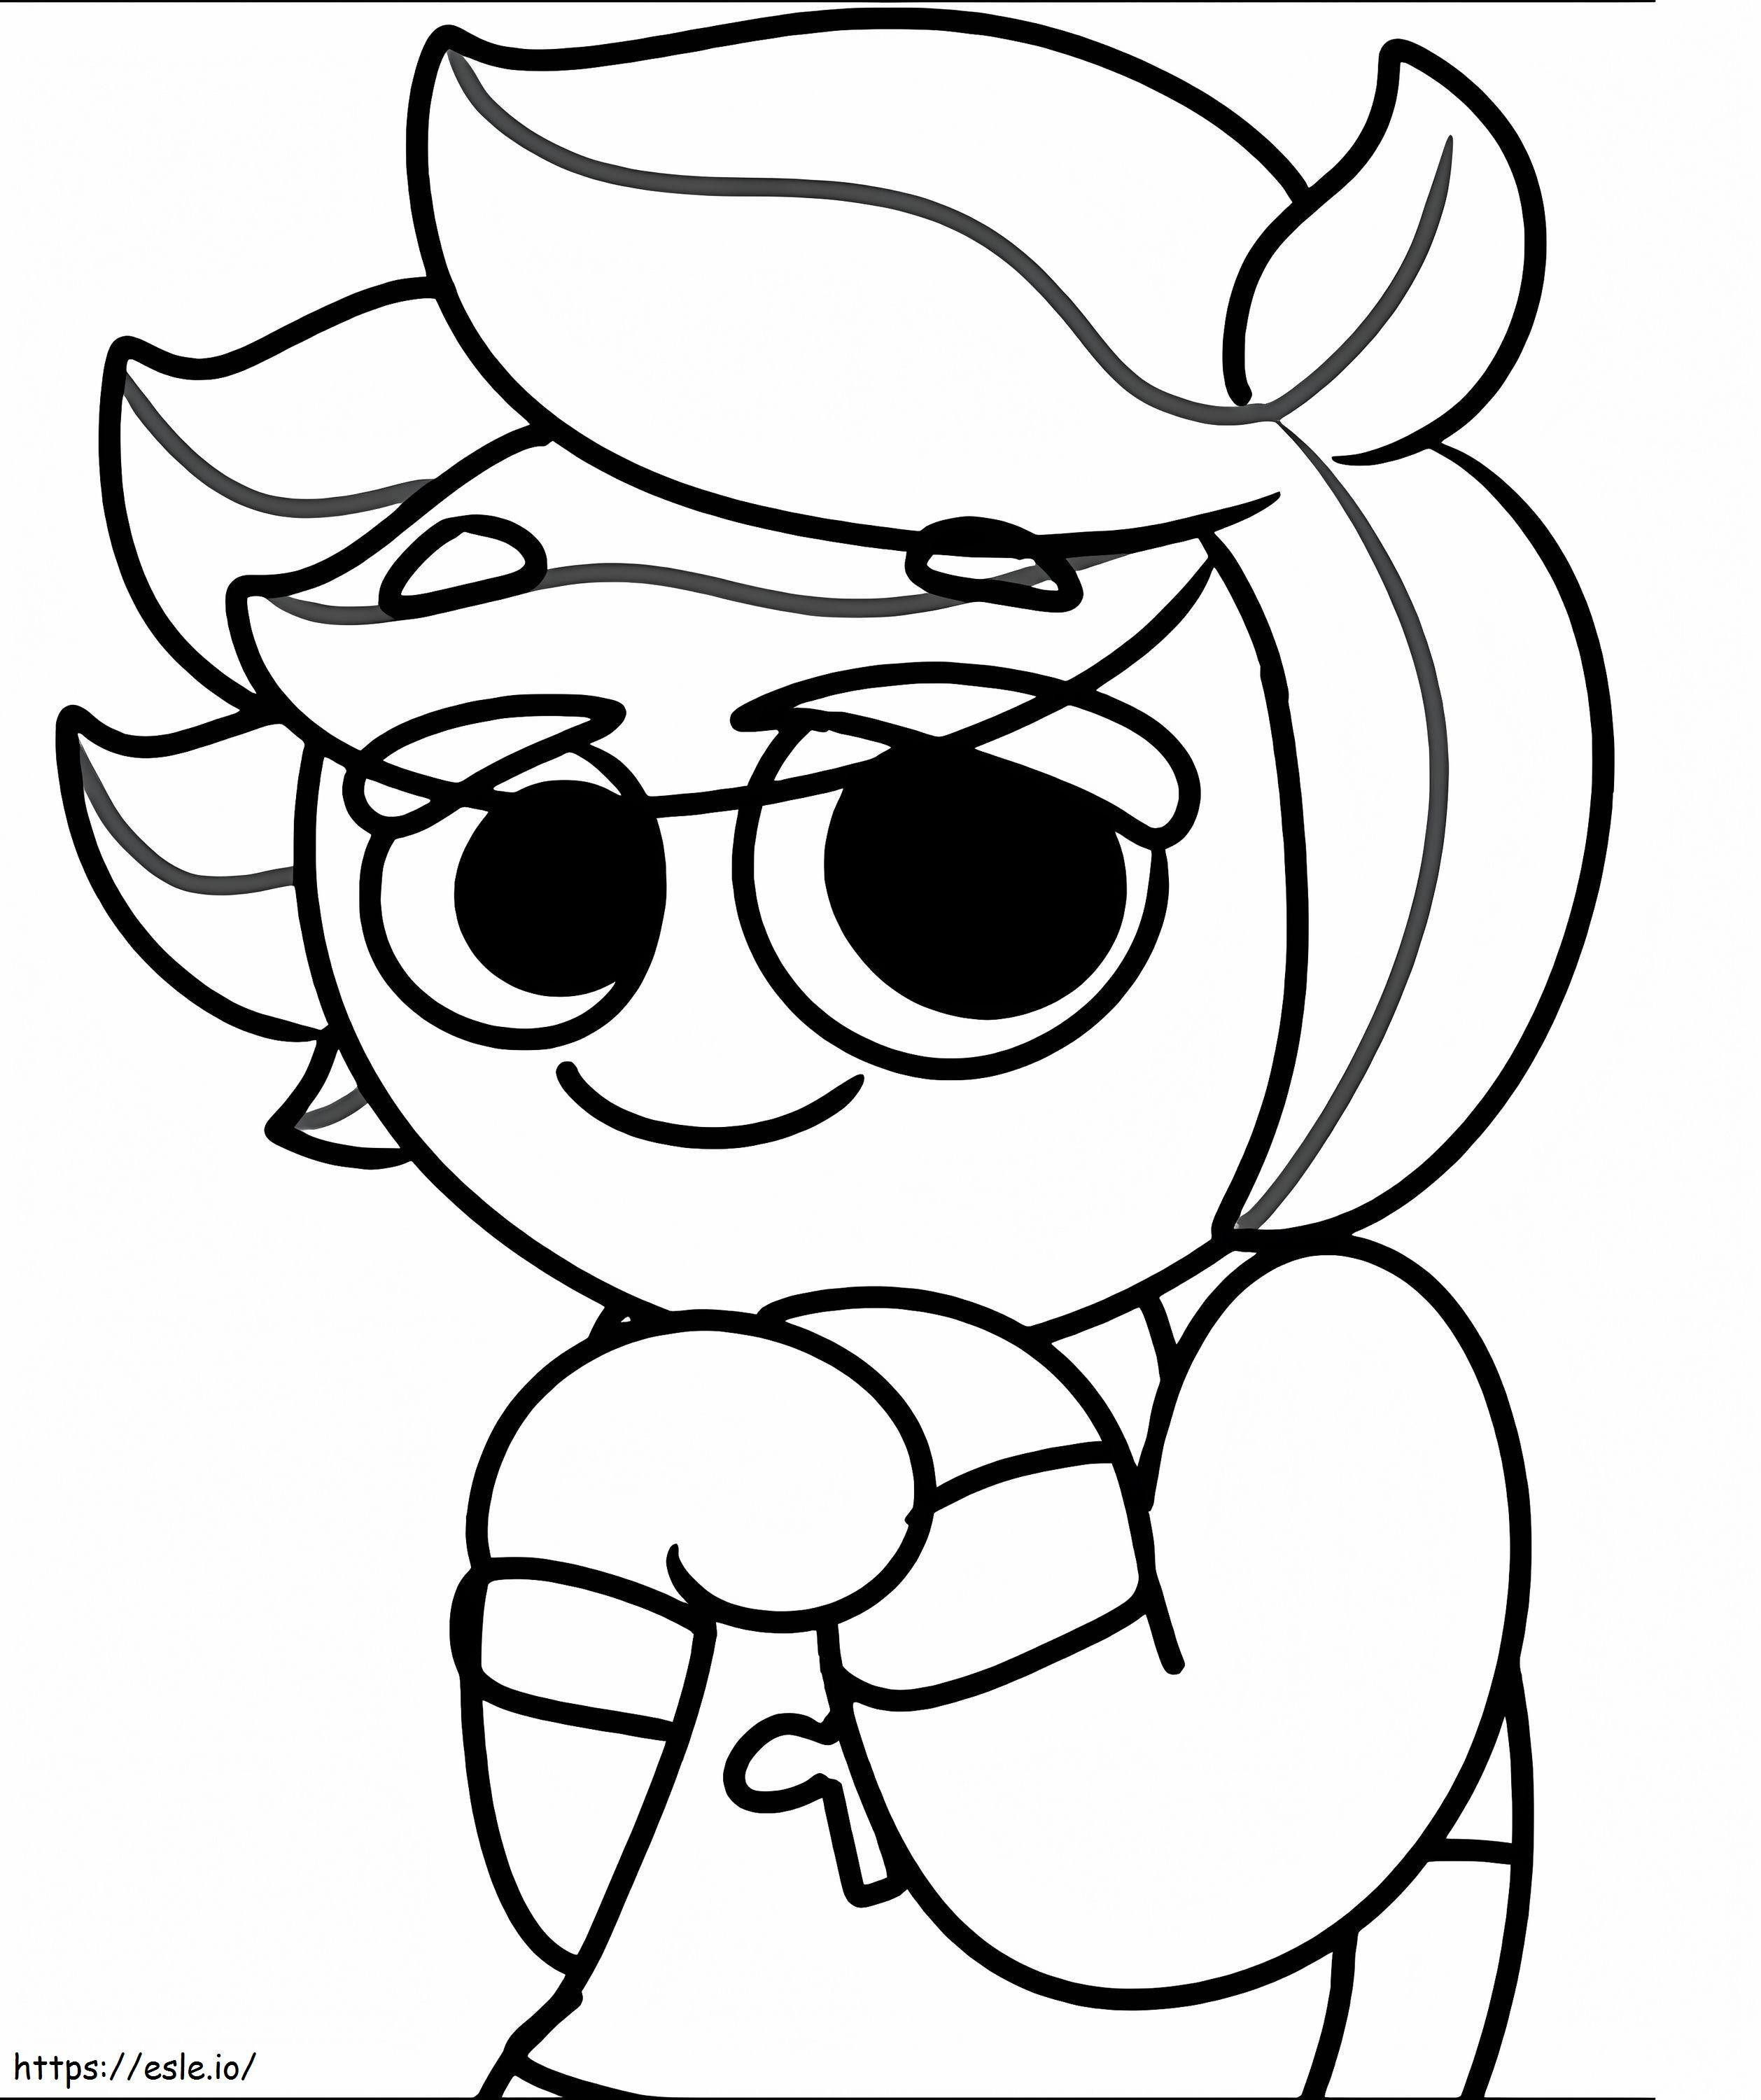 Herb Cookie Run coloring page